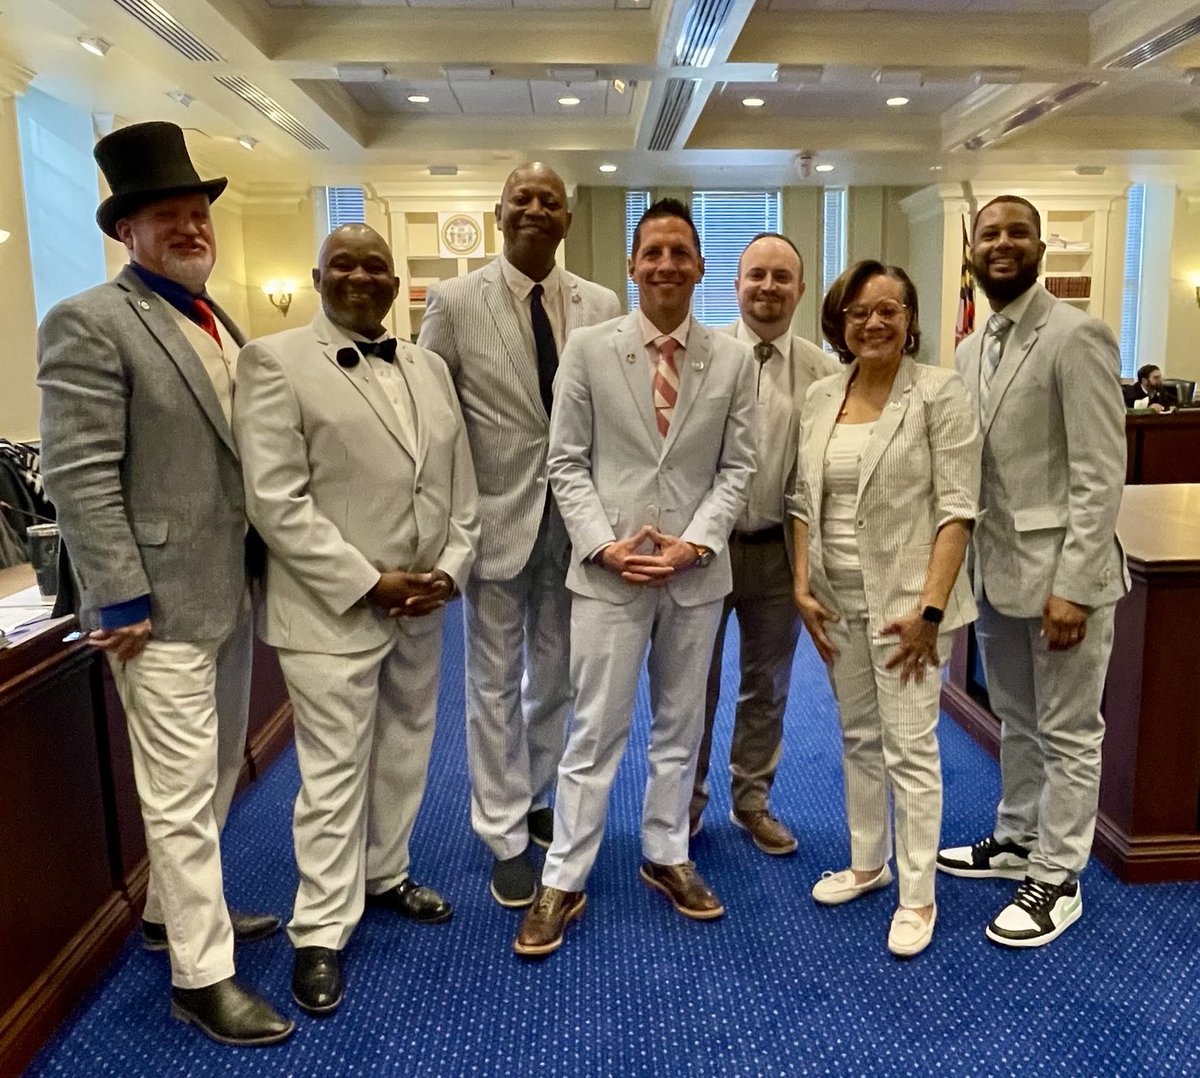 Happy sine die! The seersucker caucus is well represented in the House Judiciary Committee. It’s a tradition to break out the spring suit for the last day of lawmaking. L to R: Dels. Bouchat, Simmons, Phillips, Schmidt, Tomlinson, Taylor and Roberson.